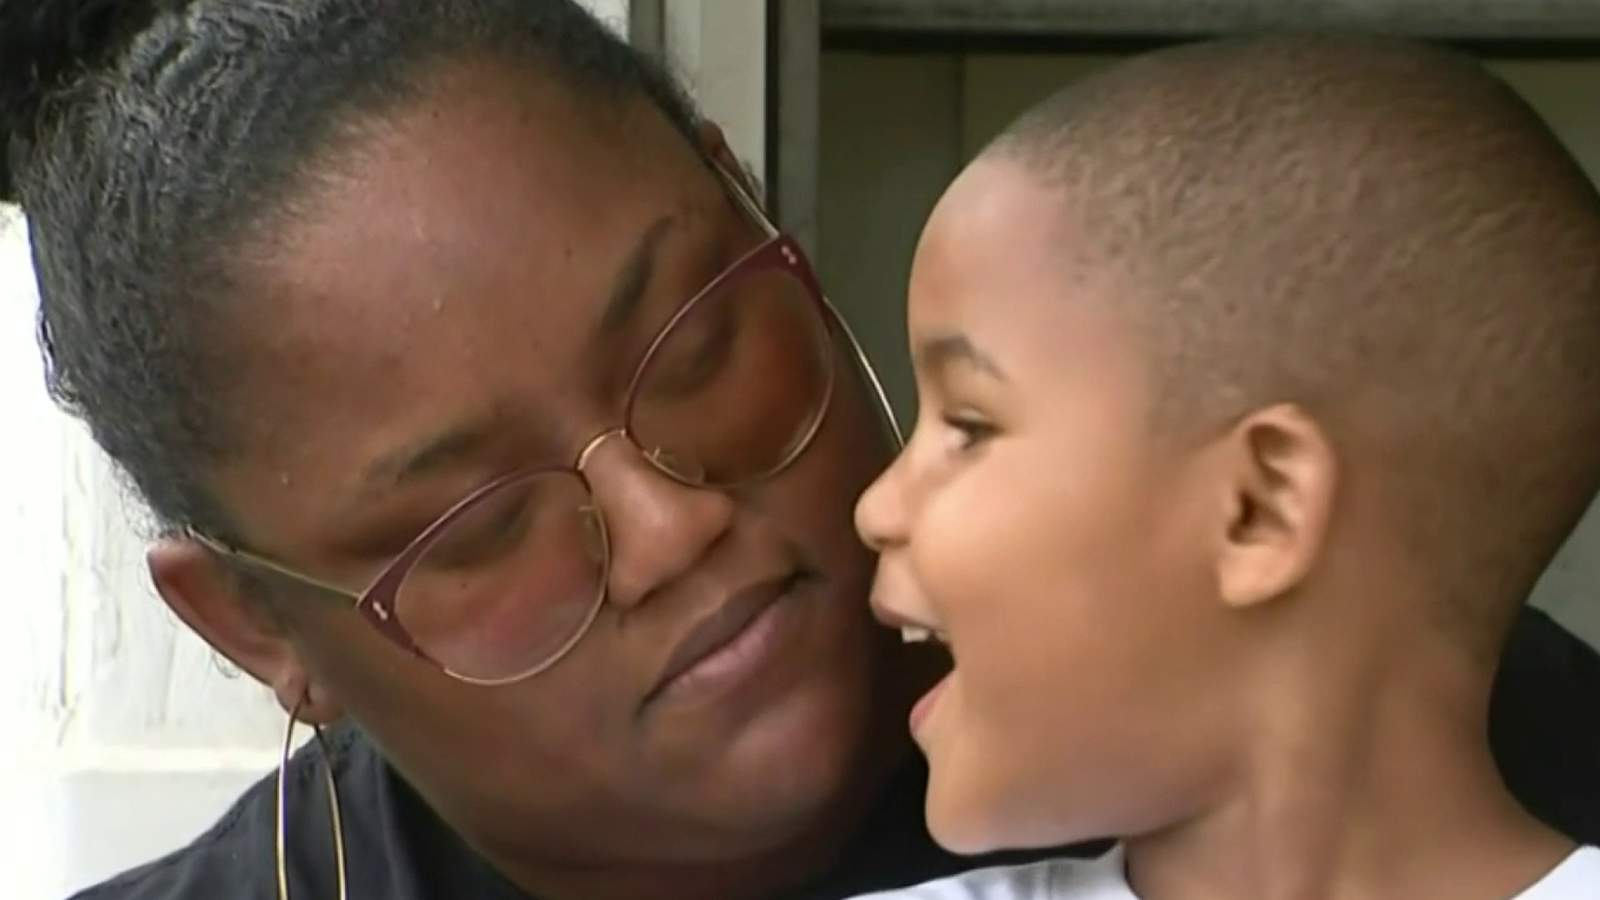 DPD officer helps crying child work through fear of police